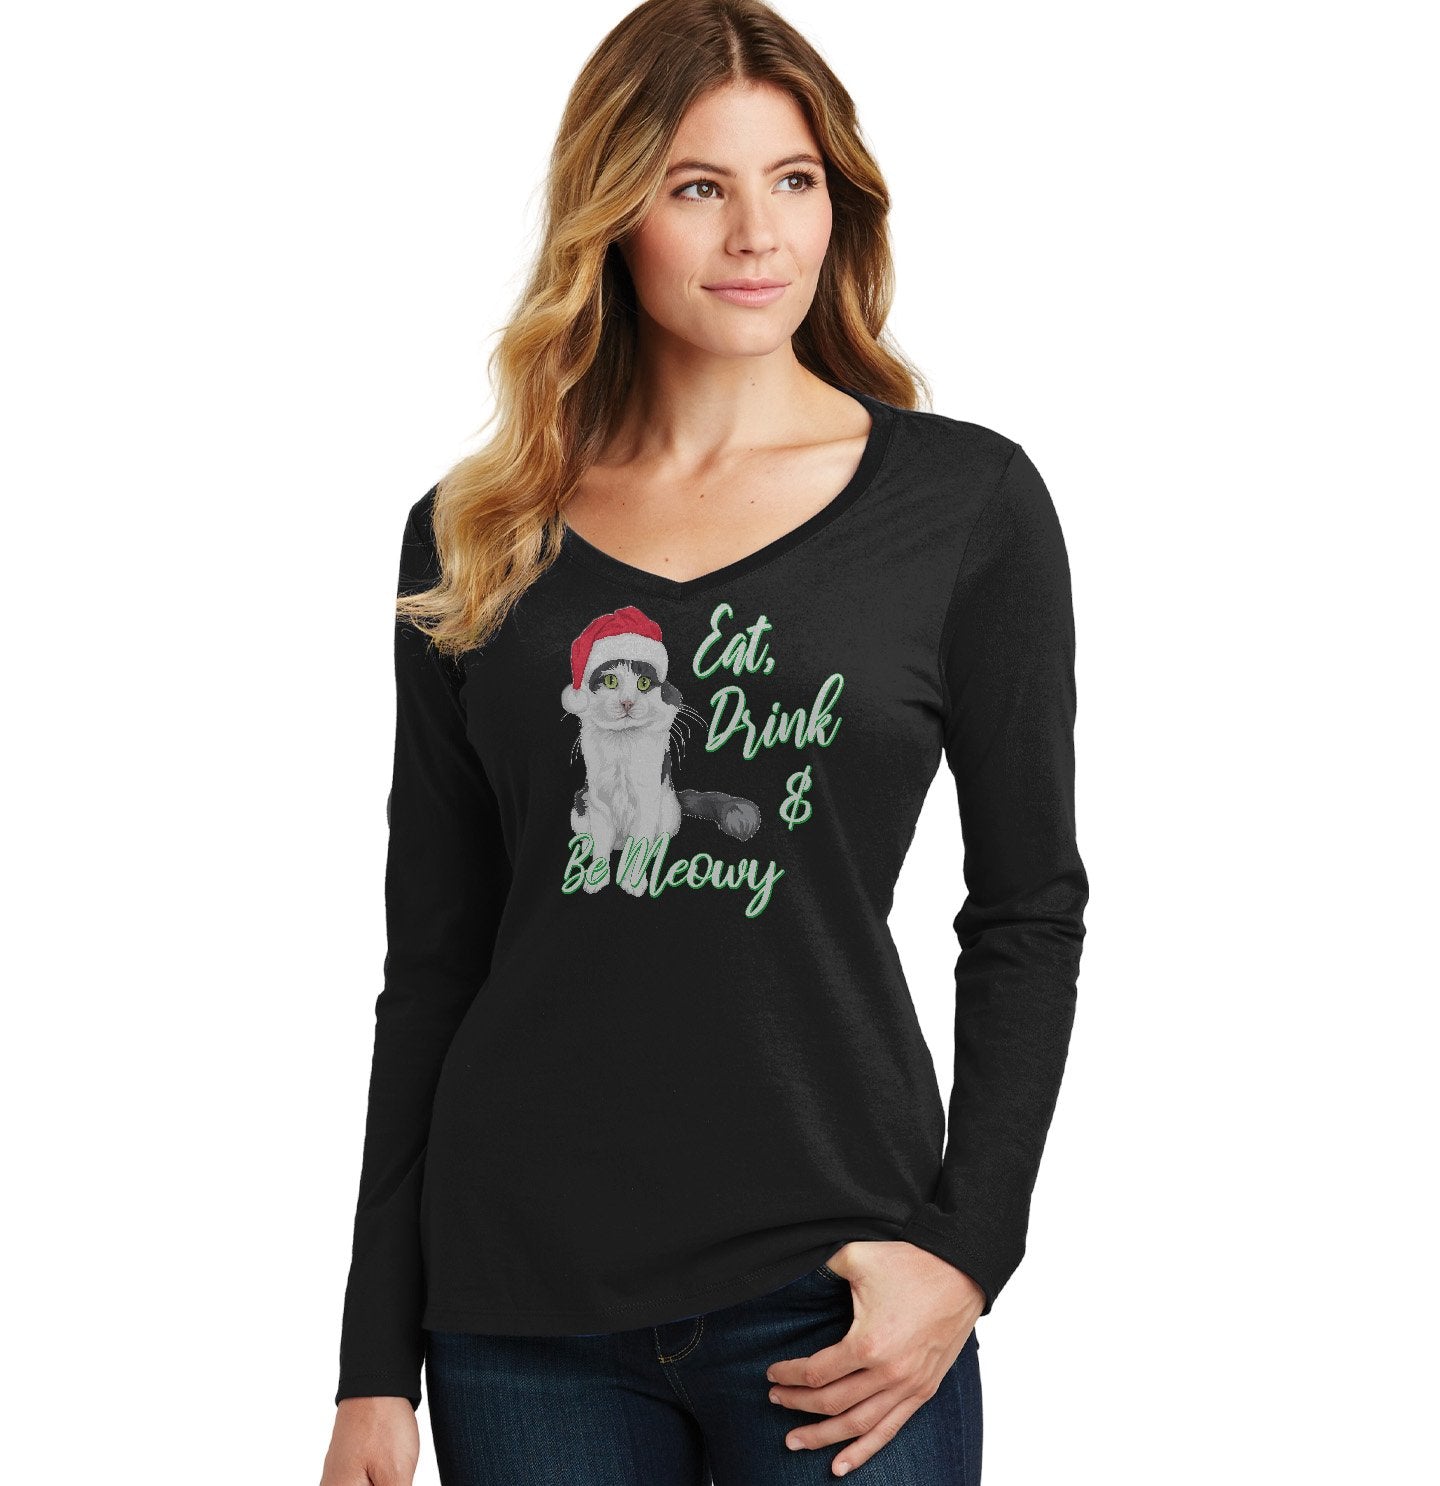 Eat Drink and Be Meowy - Women's V-Neck Long Sleeve T-Shirt